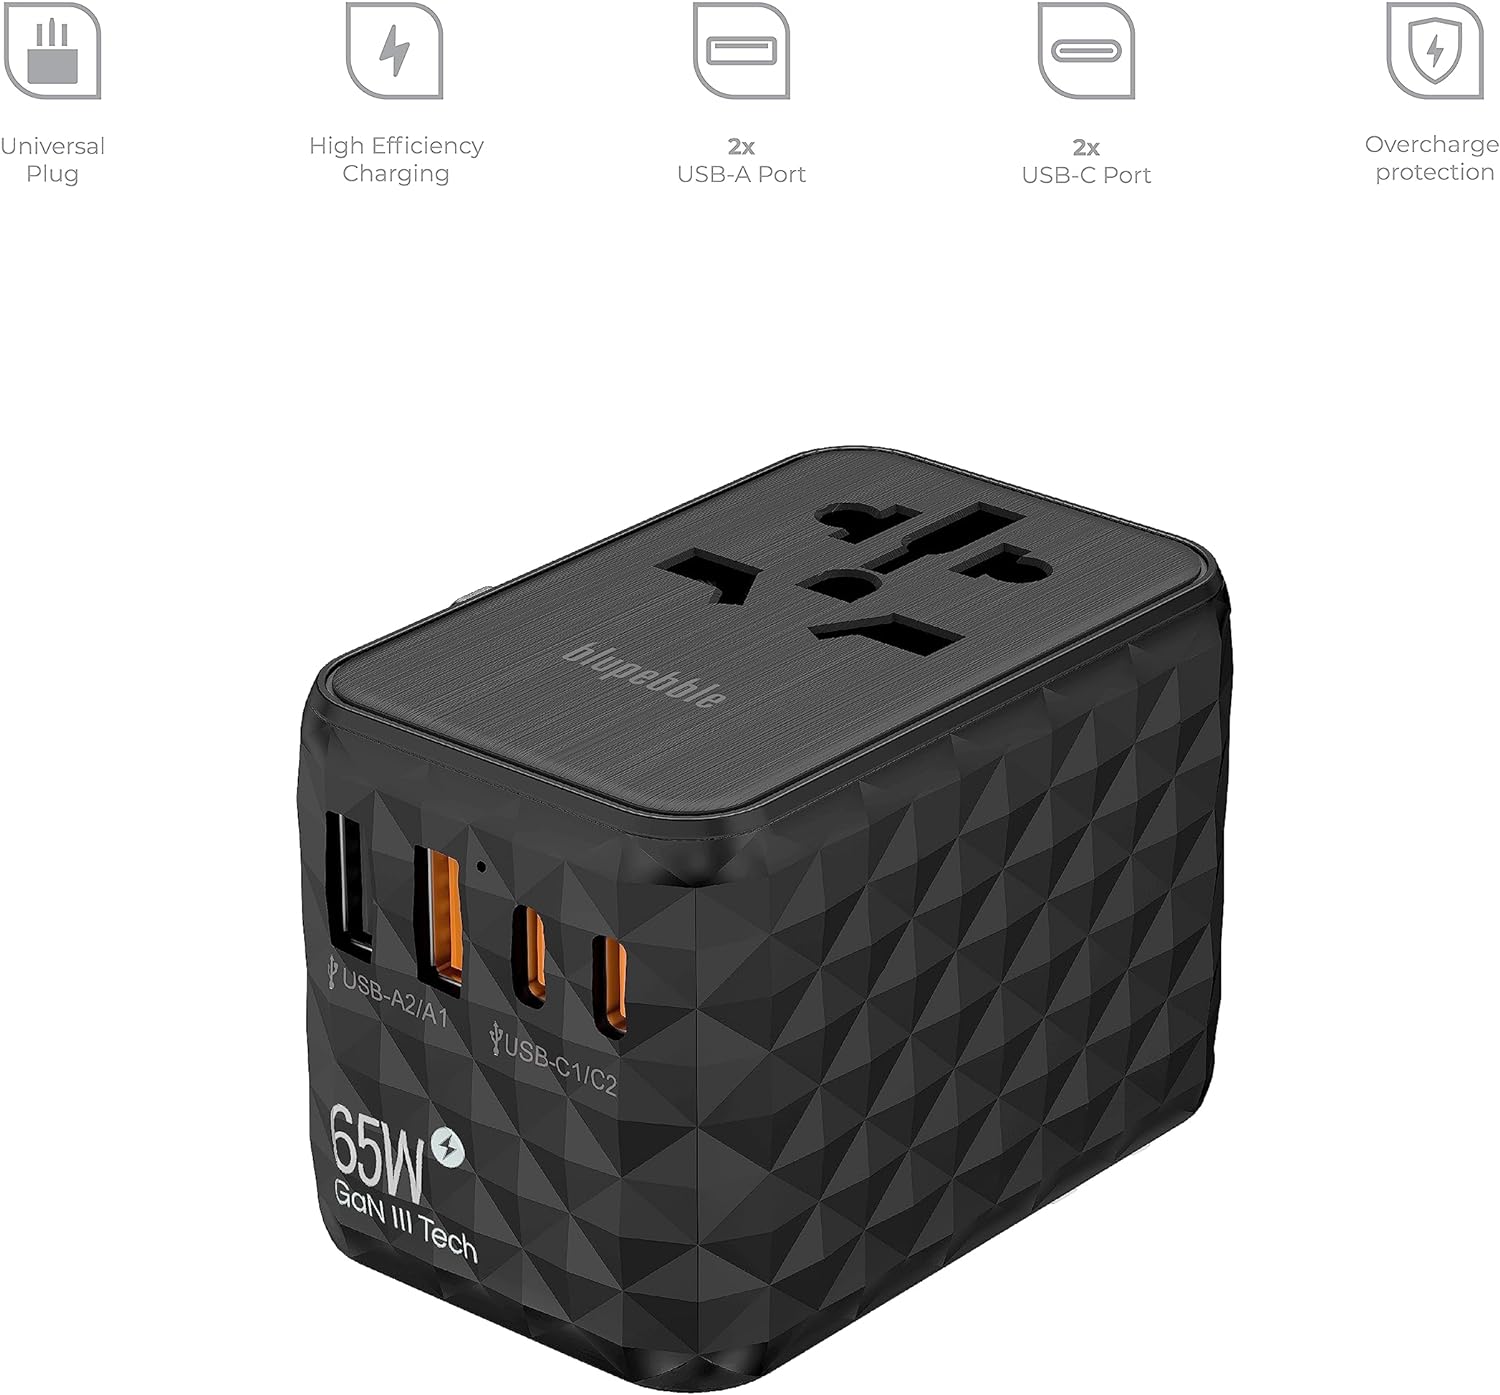 Blupebble Passport 2.1 World Travel Adapter with 2 USB-C + 2 USB-A ports, 65W PD Fast Charge and 60W QC 3.0 Charging Max for EU, UK, USA, AU, Power Adapter Socket for Multi Countries (Black)